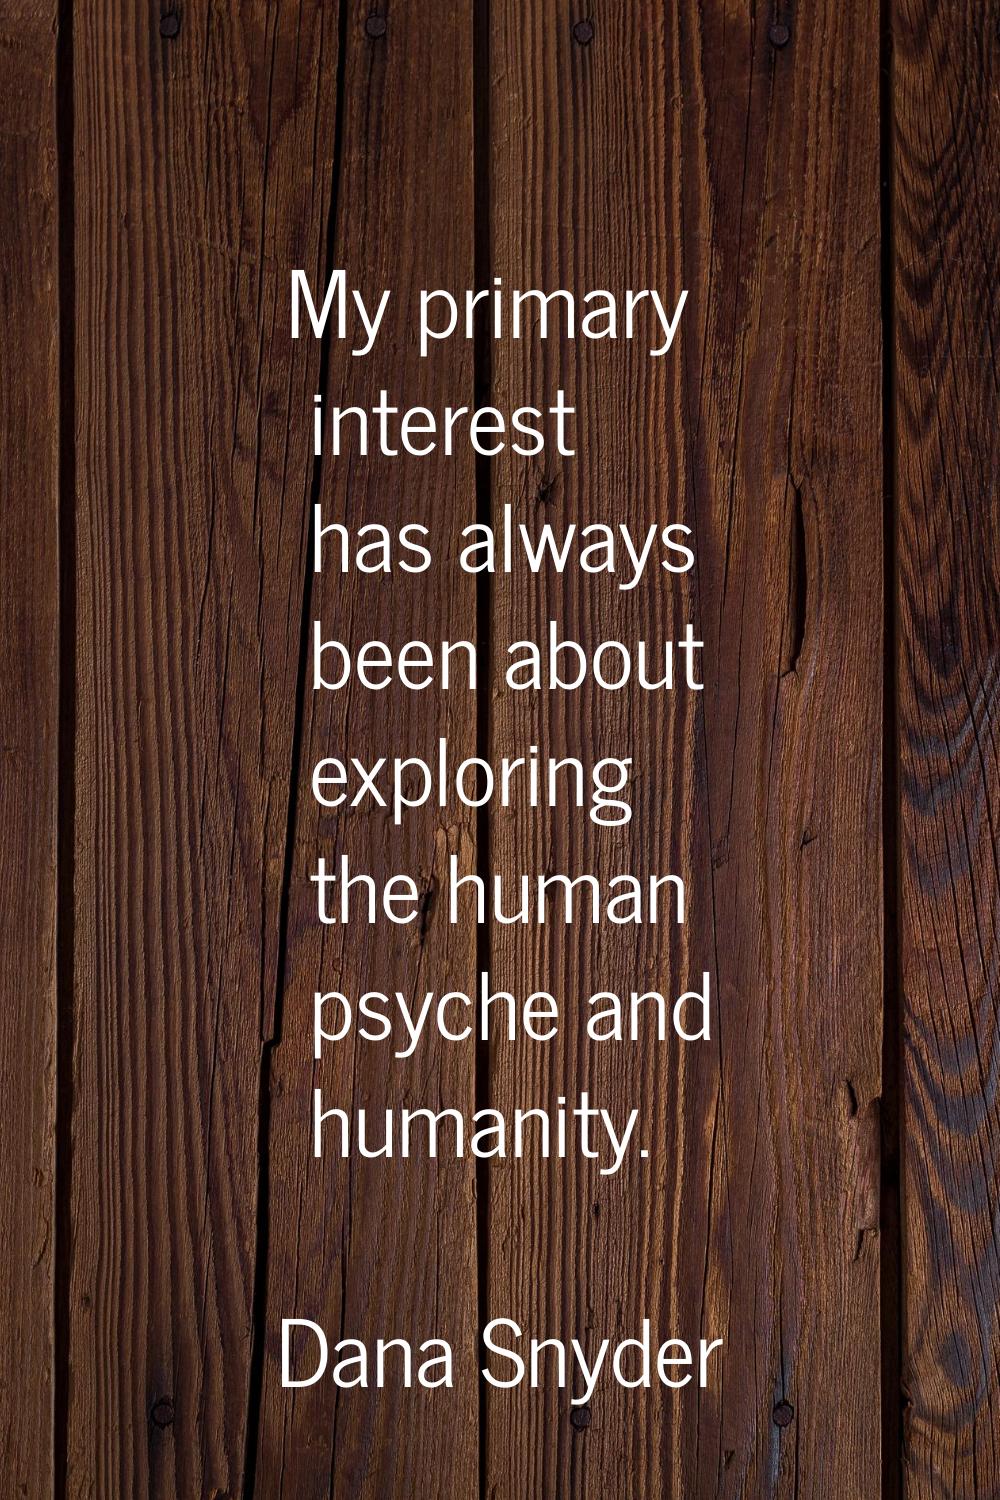 My primary interest has always been about exploring the human psyche and humanity.